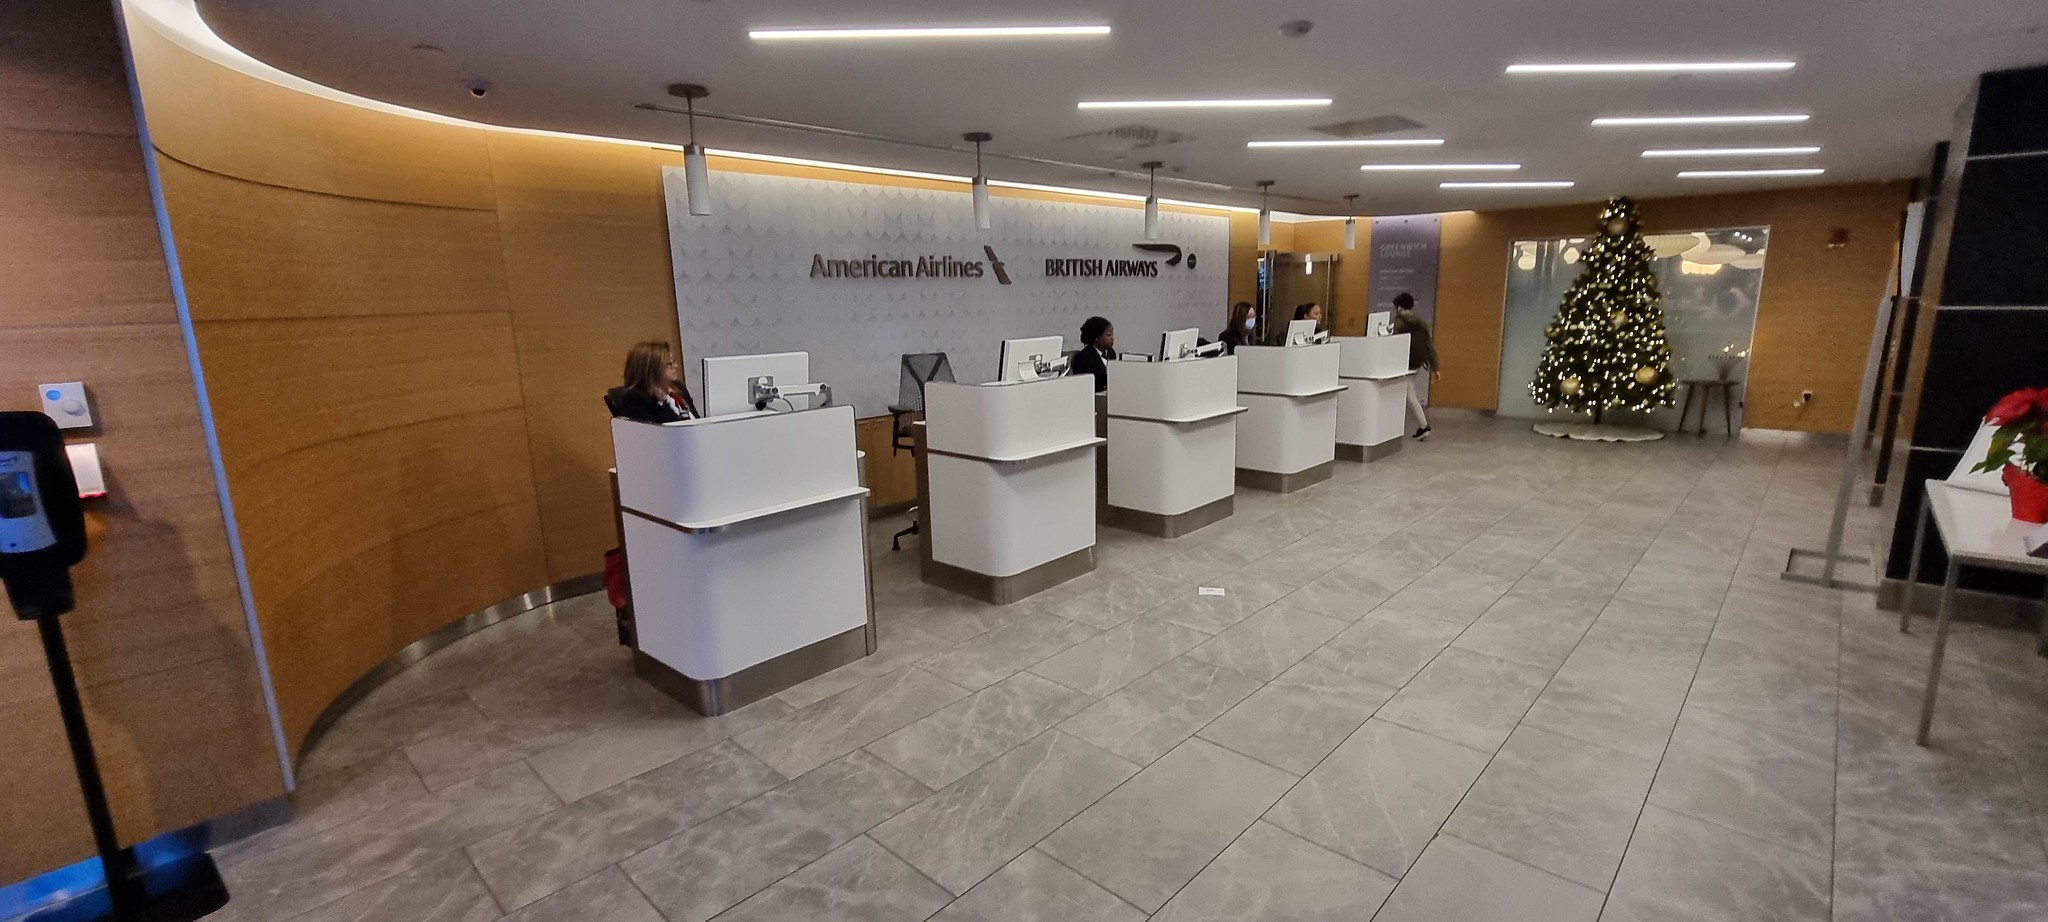 The registration desks in the Greenwich Lounge at JFK T8